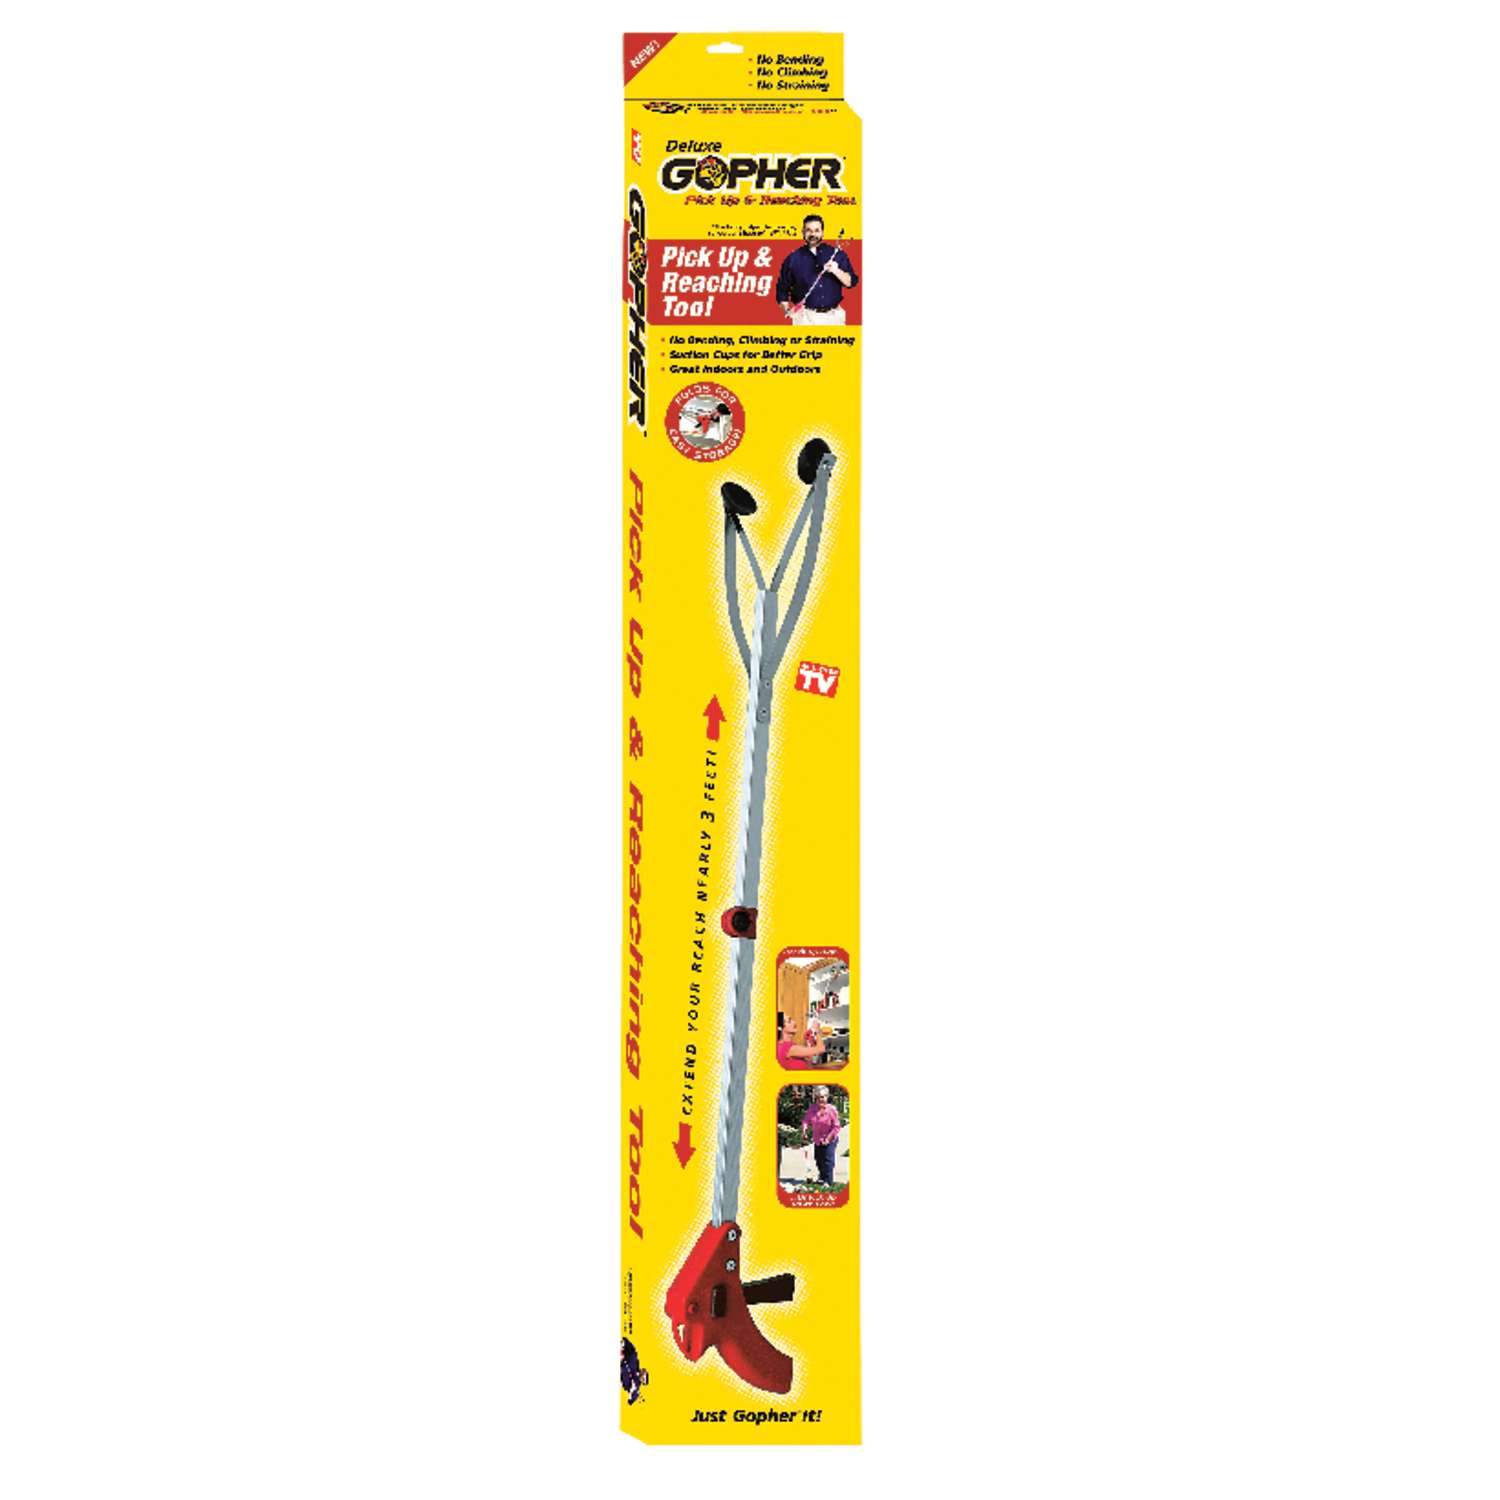 Gopher II  As Seen On TV  Pick-Up and Reaching Tool  1 pk 